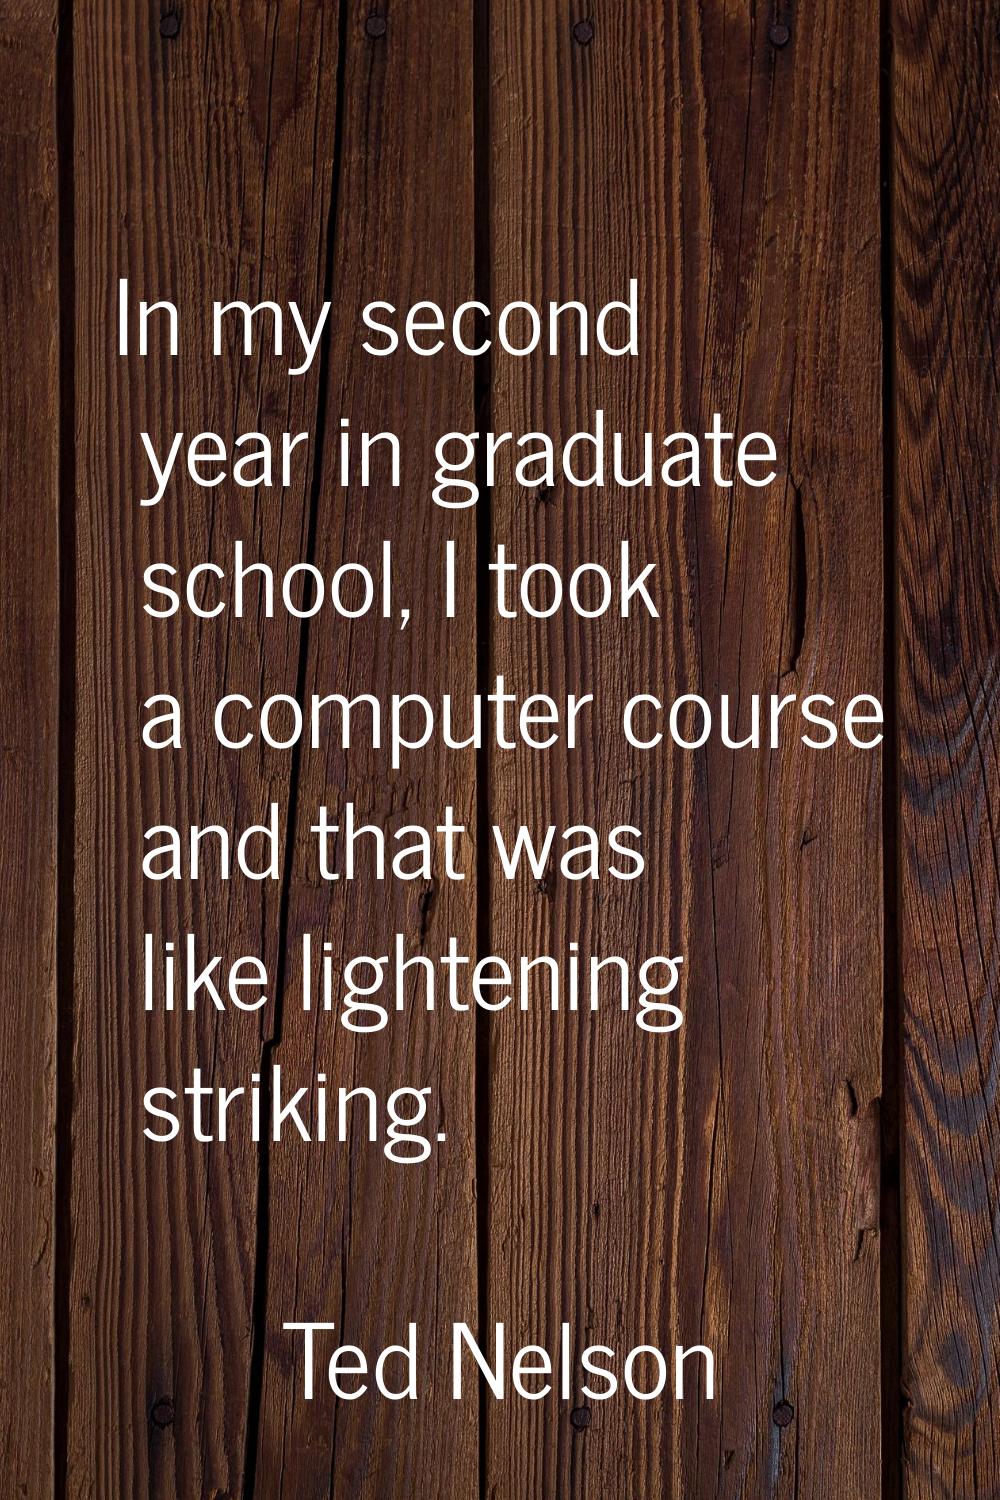 In my second year in graduate school, I took a computer course and that was like lightening strikin